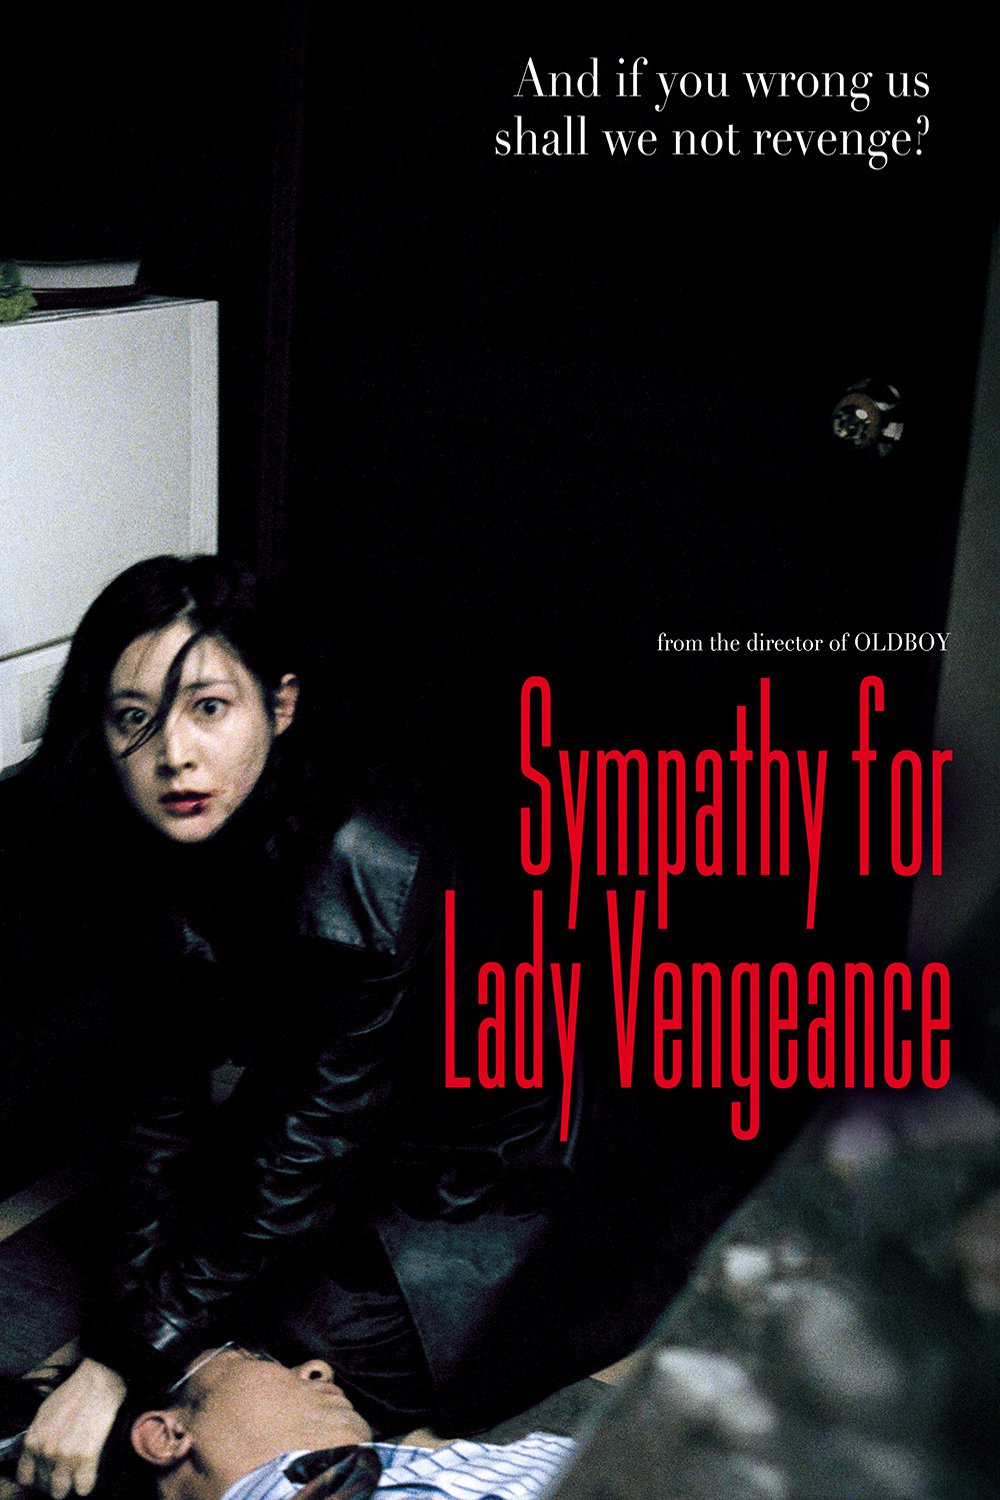 Poster for the movie "Sympathy for Lady Vengeance"